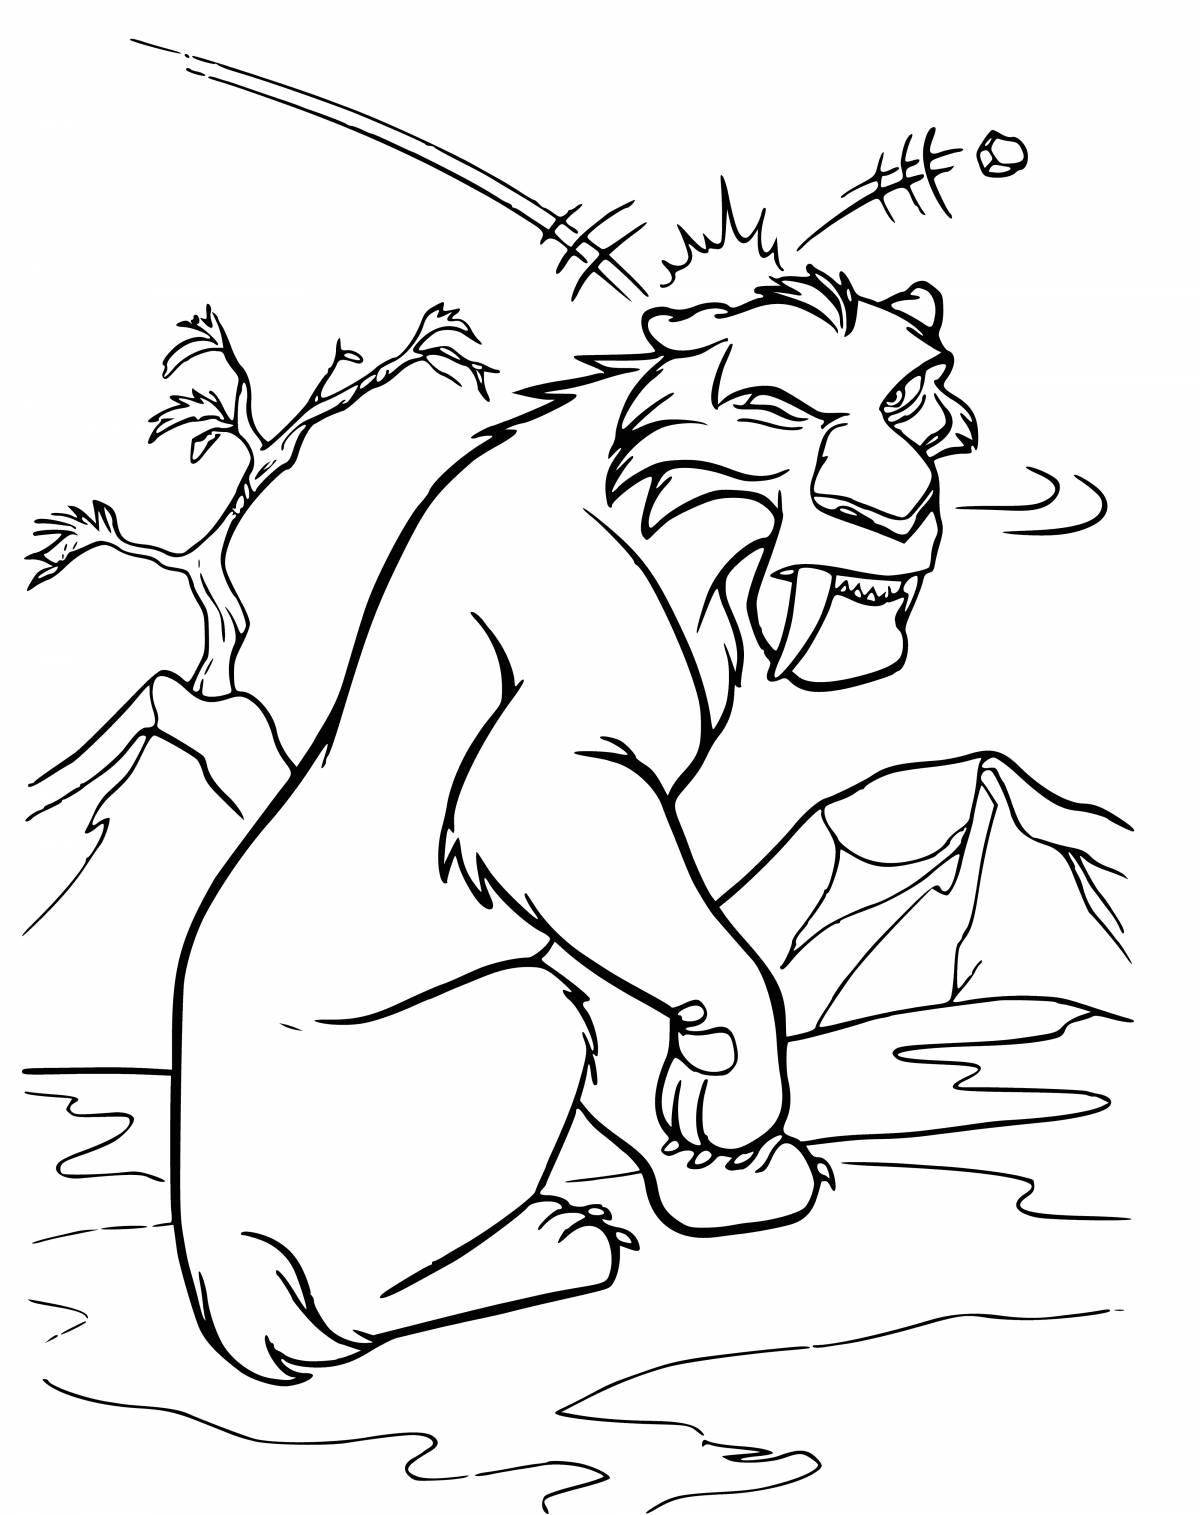 Amazing saber tooth tiger coloring page